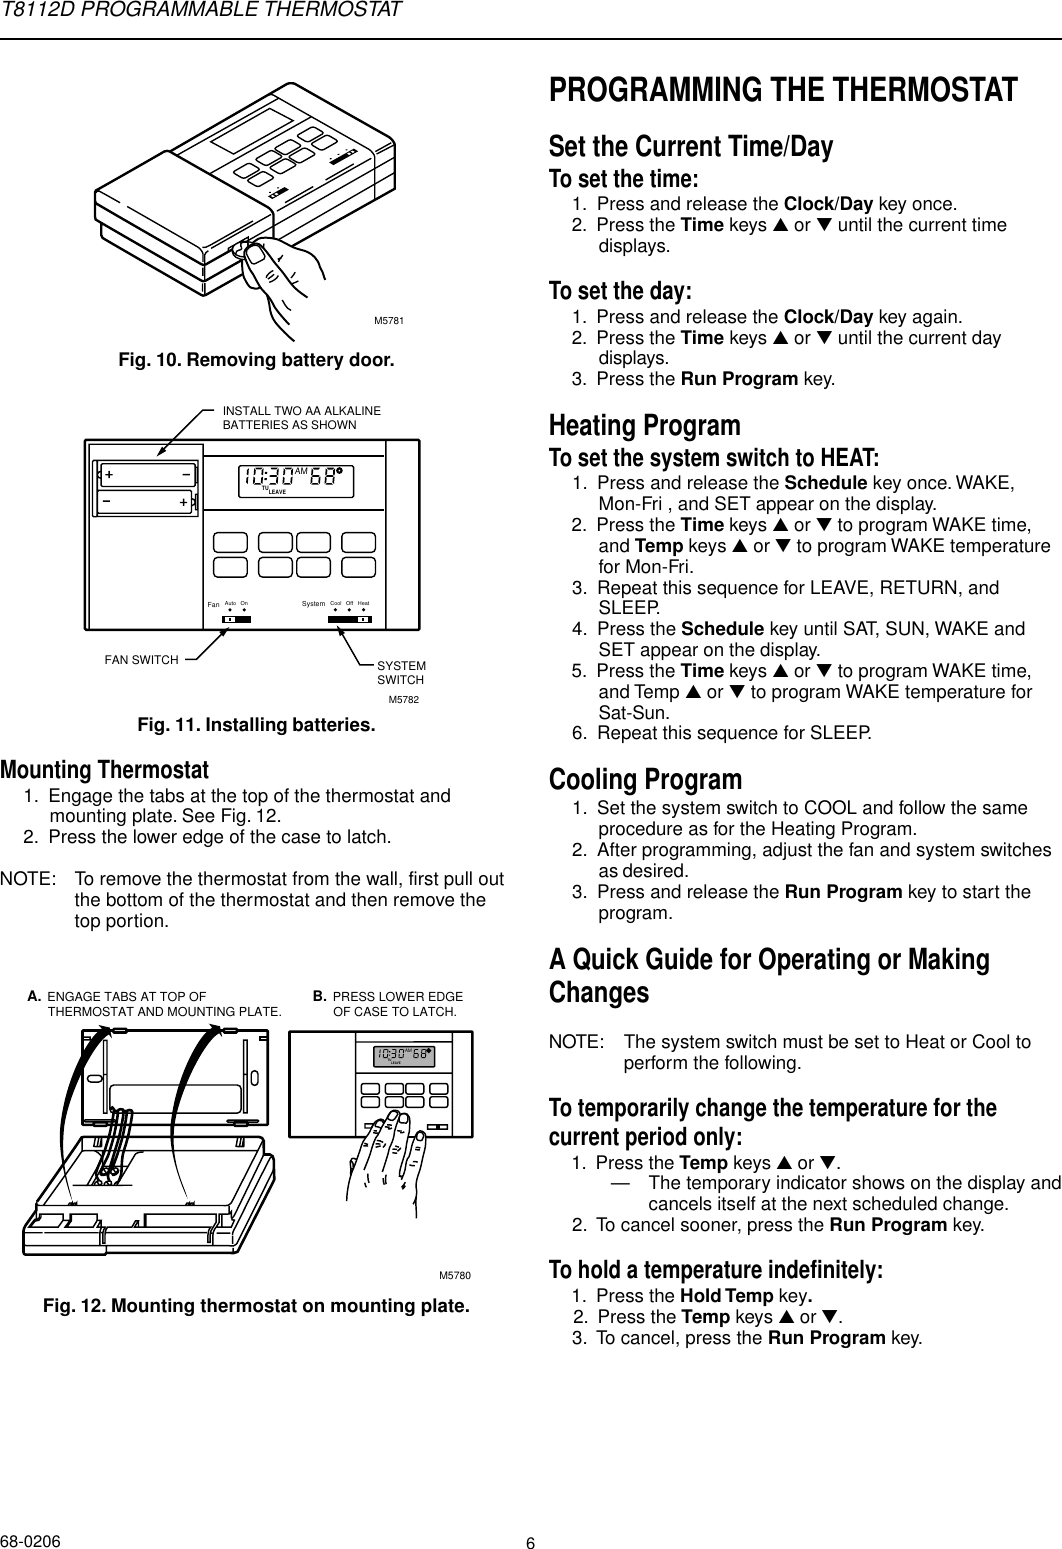 Page 6 of 8 - Honeywell Honeywell-Honeywell-Thermostat-T8112D-Users-Manual- 68-0170 - T8112 Programmable Thermostat  Honeywell-honeywell-thermostat-t8112d-users-manual